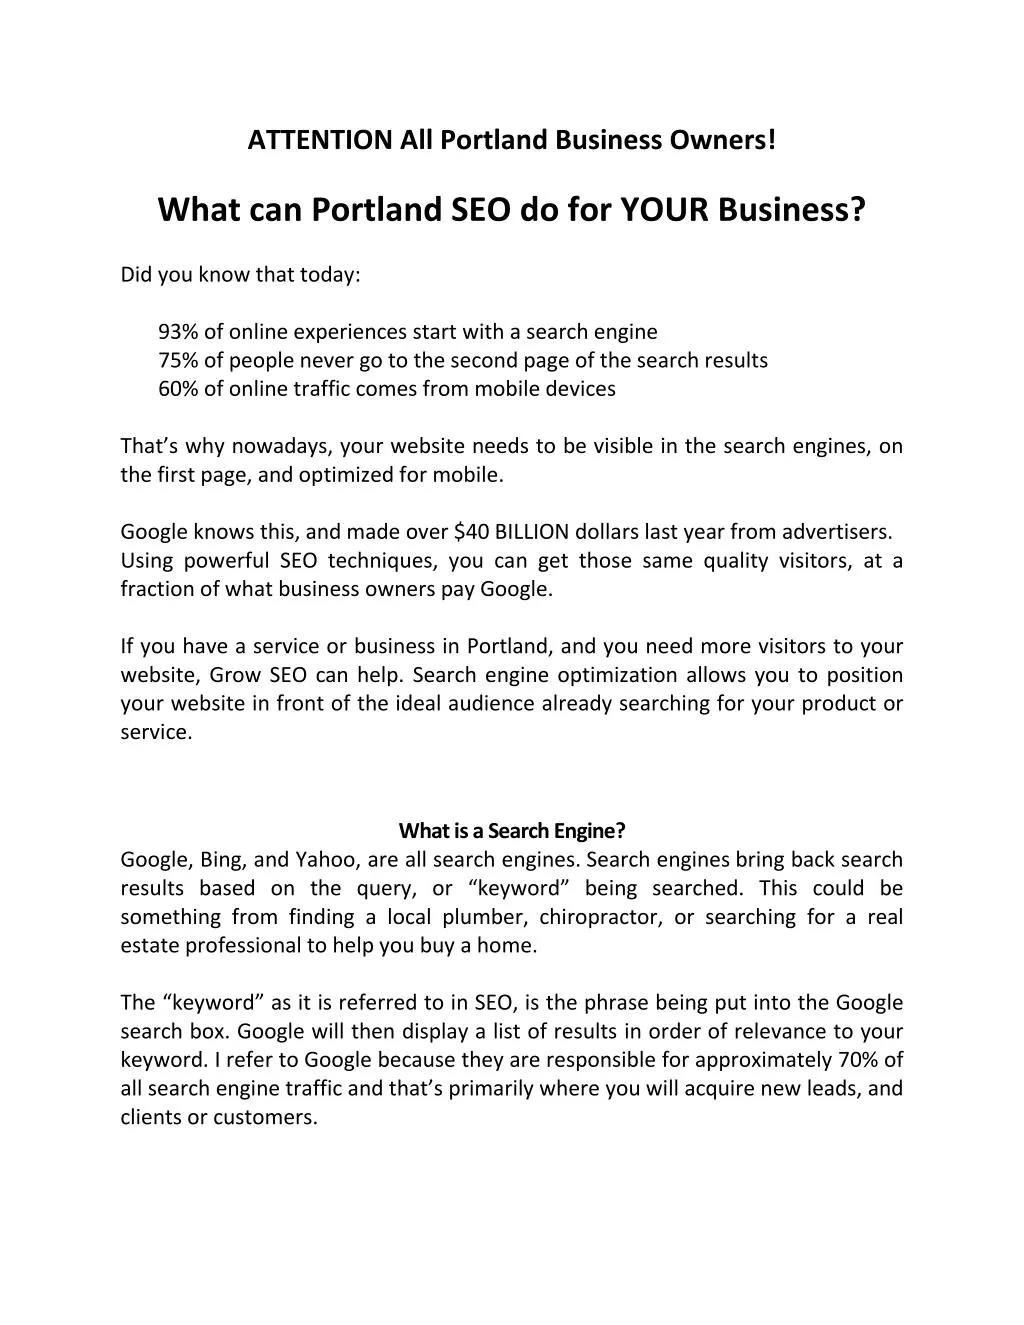 attention all portland business owners what